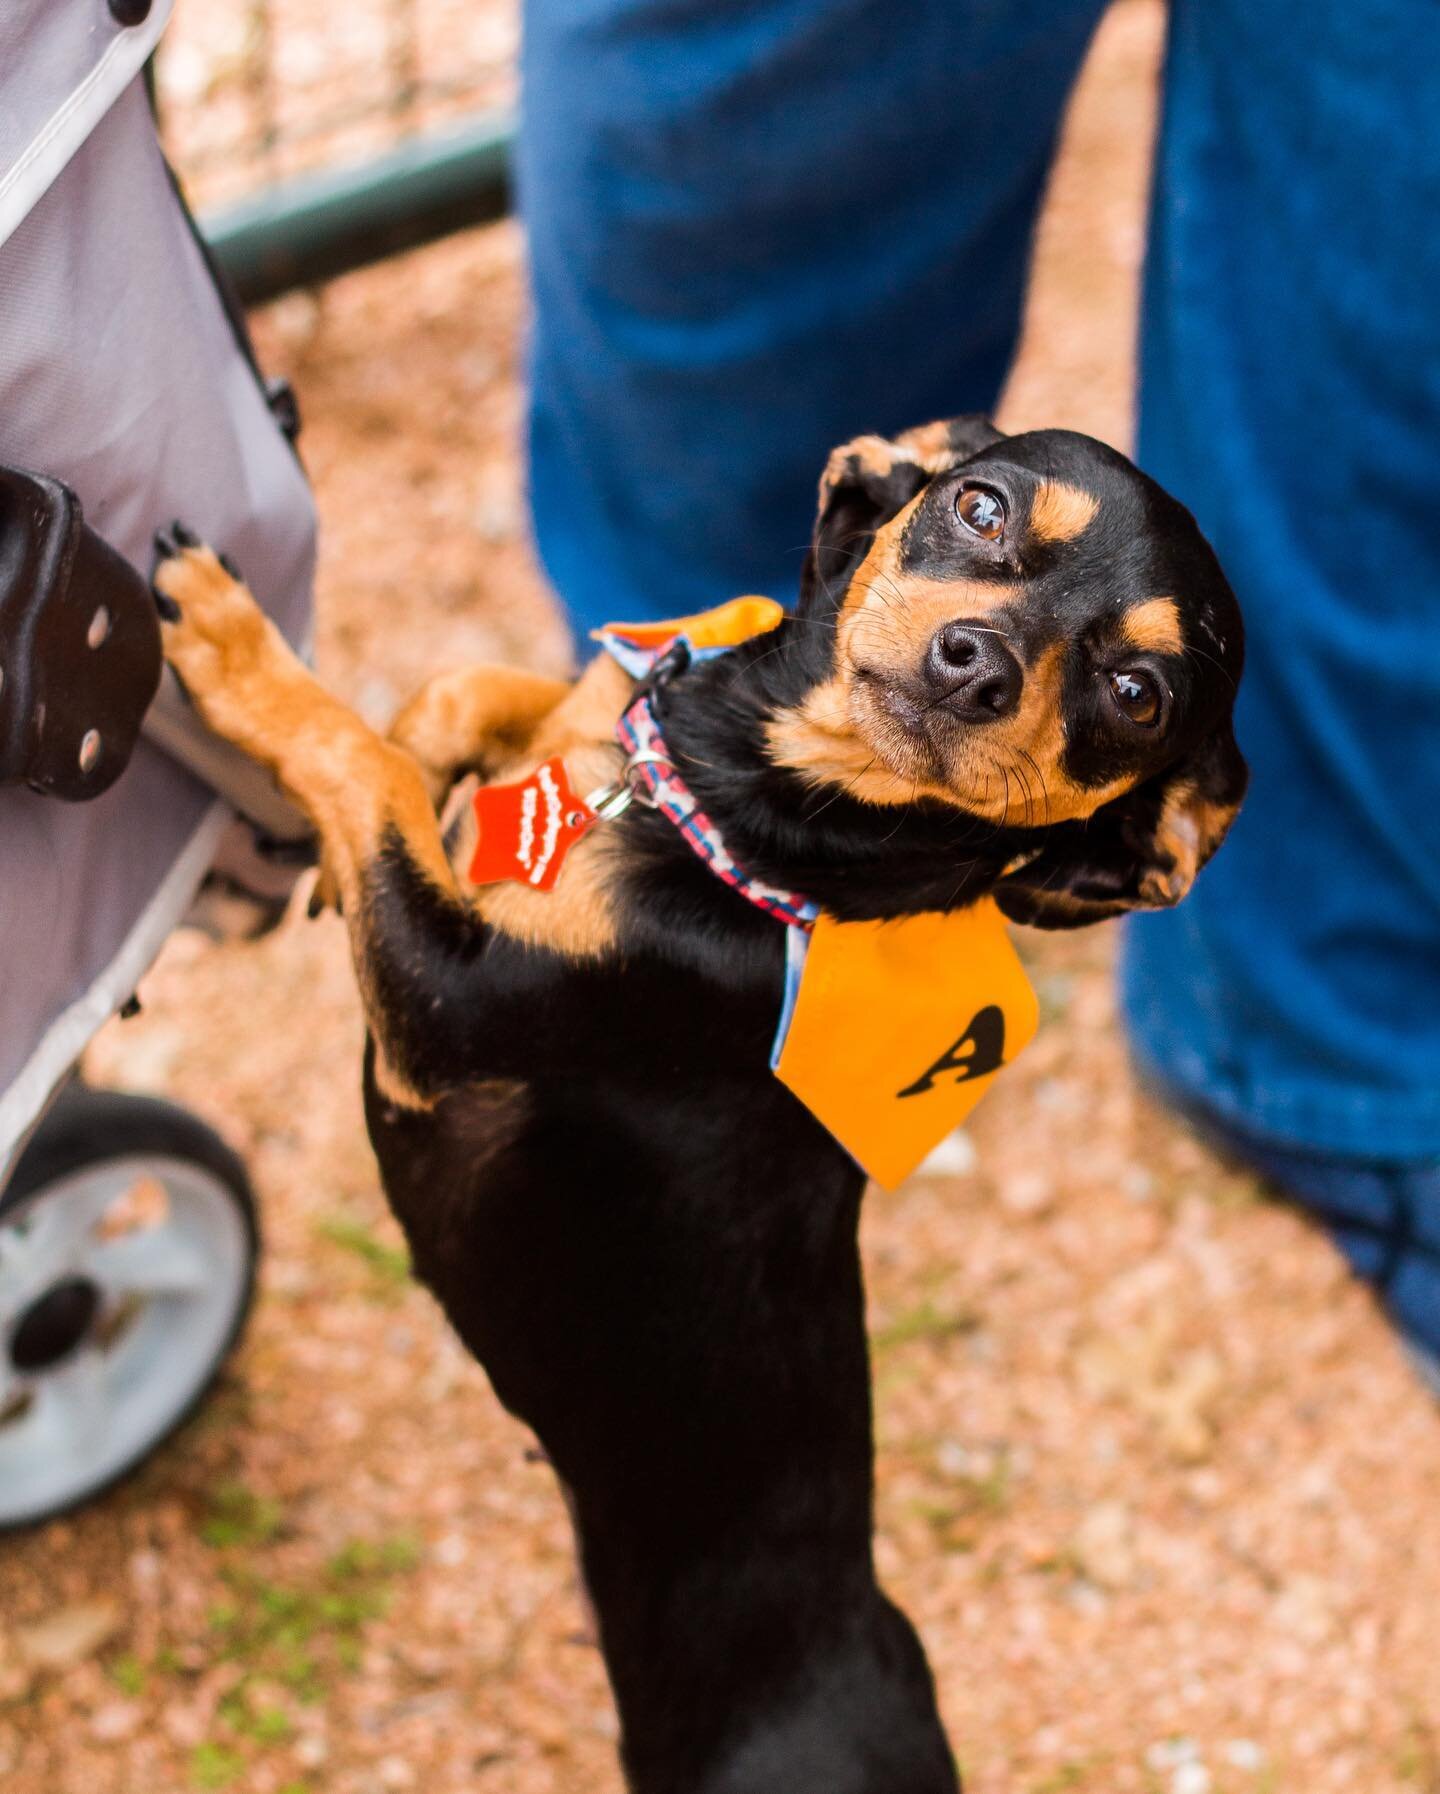 Another adoptable puppy from @diamonddachrescue this is Dana the sweetest little girl who loves to cuddle 🥰 if you&rsquo;re interested in adding this little girl to your family put in an application today! (It only takes a few minutes to fill out) #